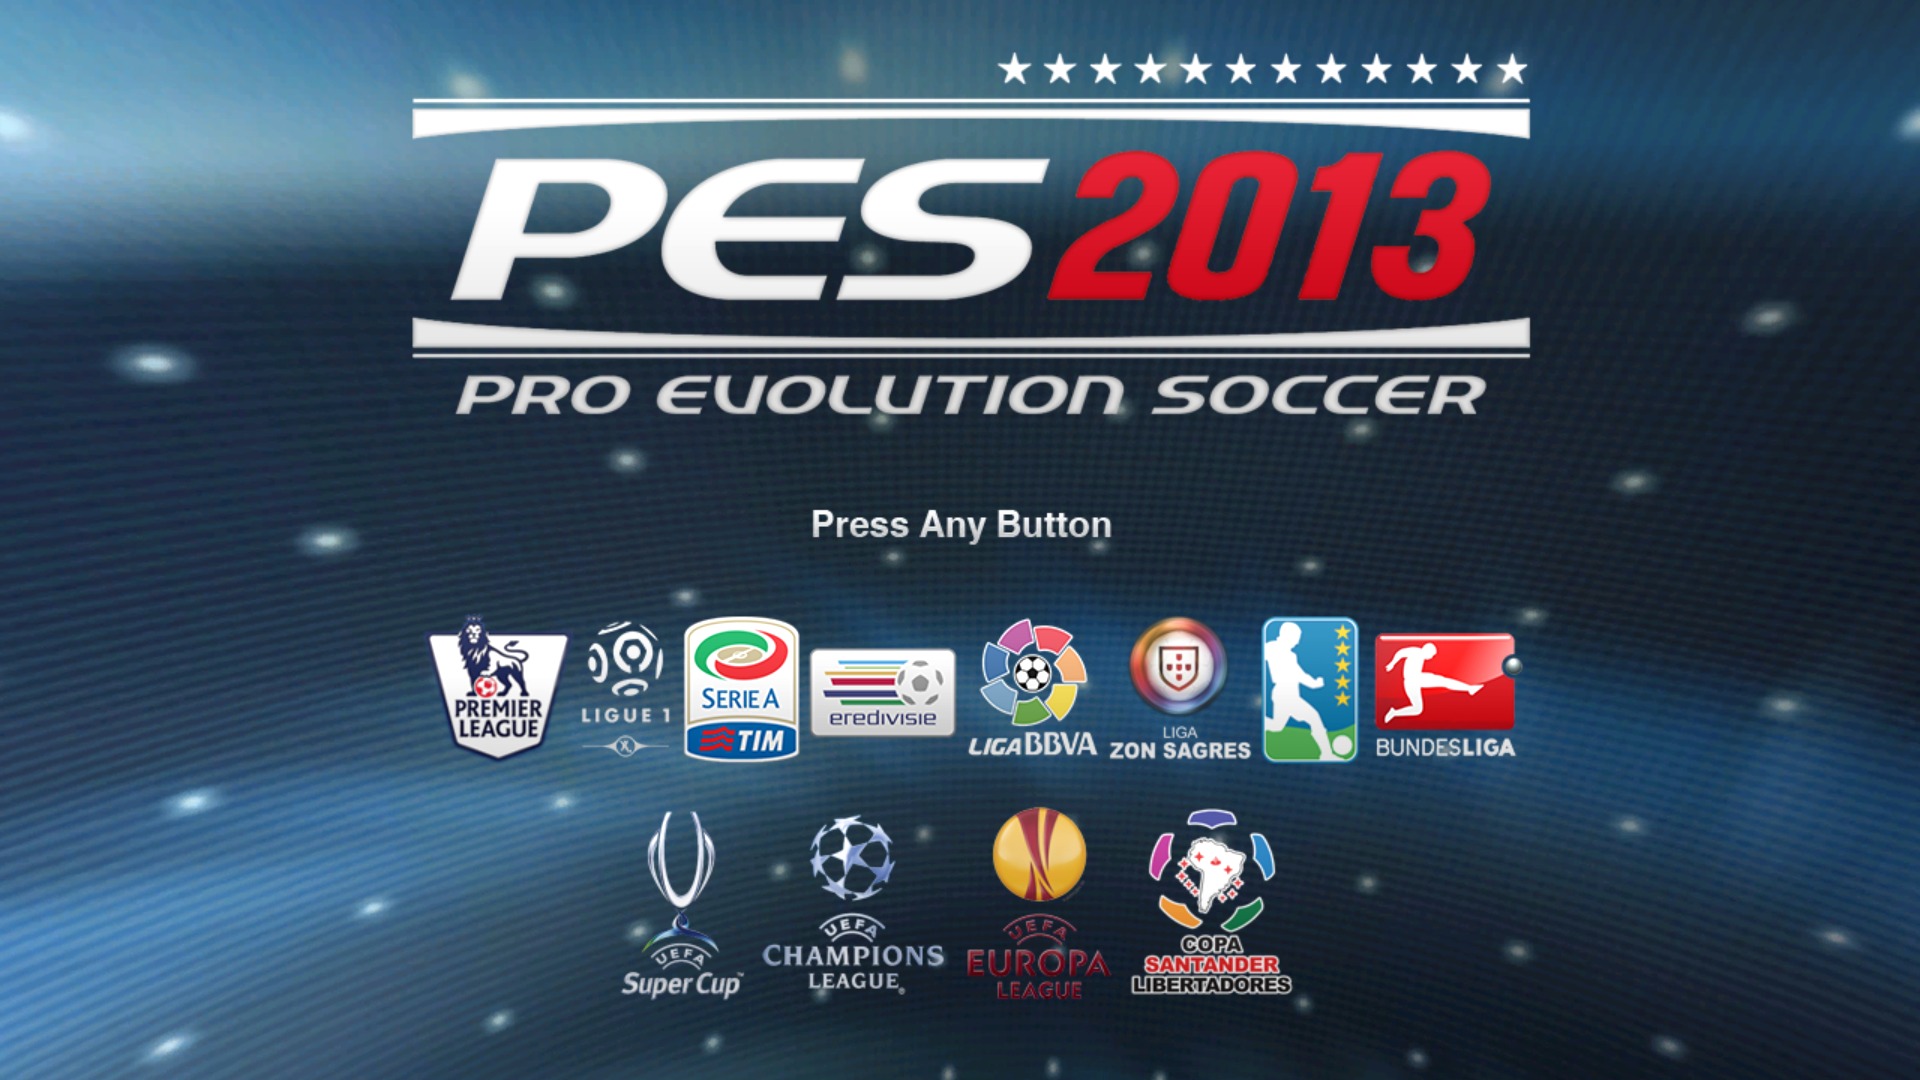 Download patch pes 2013 pc 2.0 single link